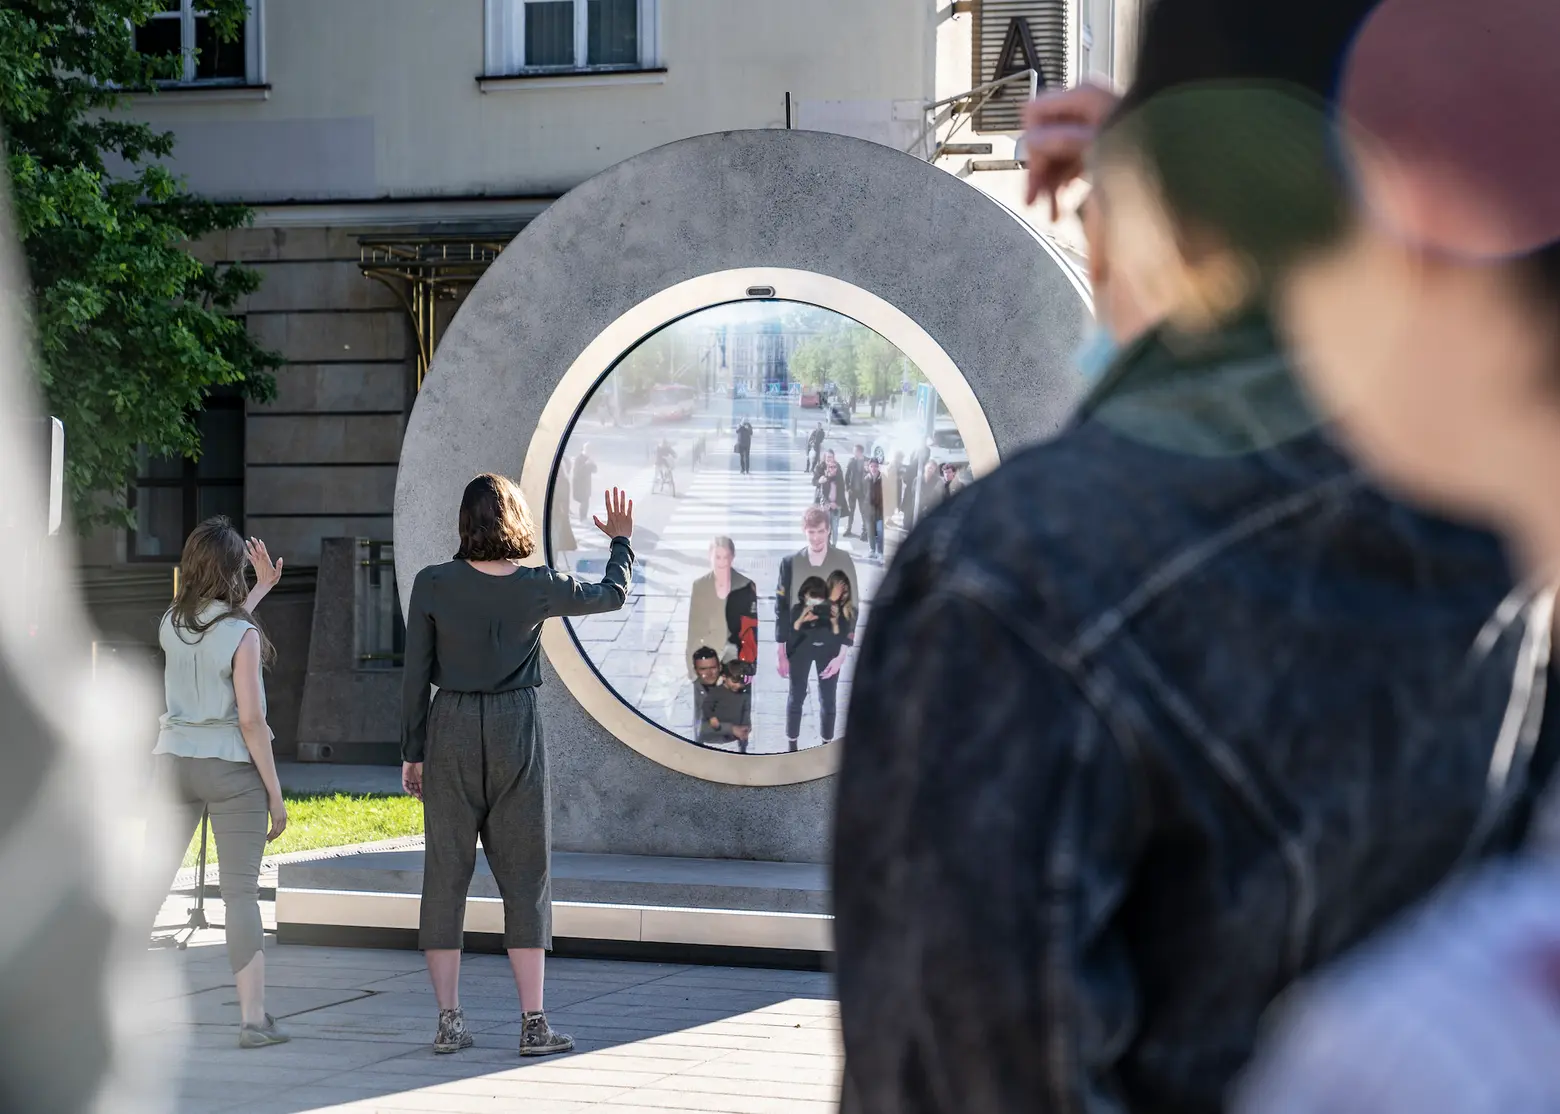 New ‘portal’ sculpture to provide real-time live stream between New York City and Dublin